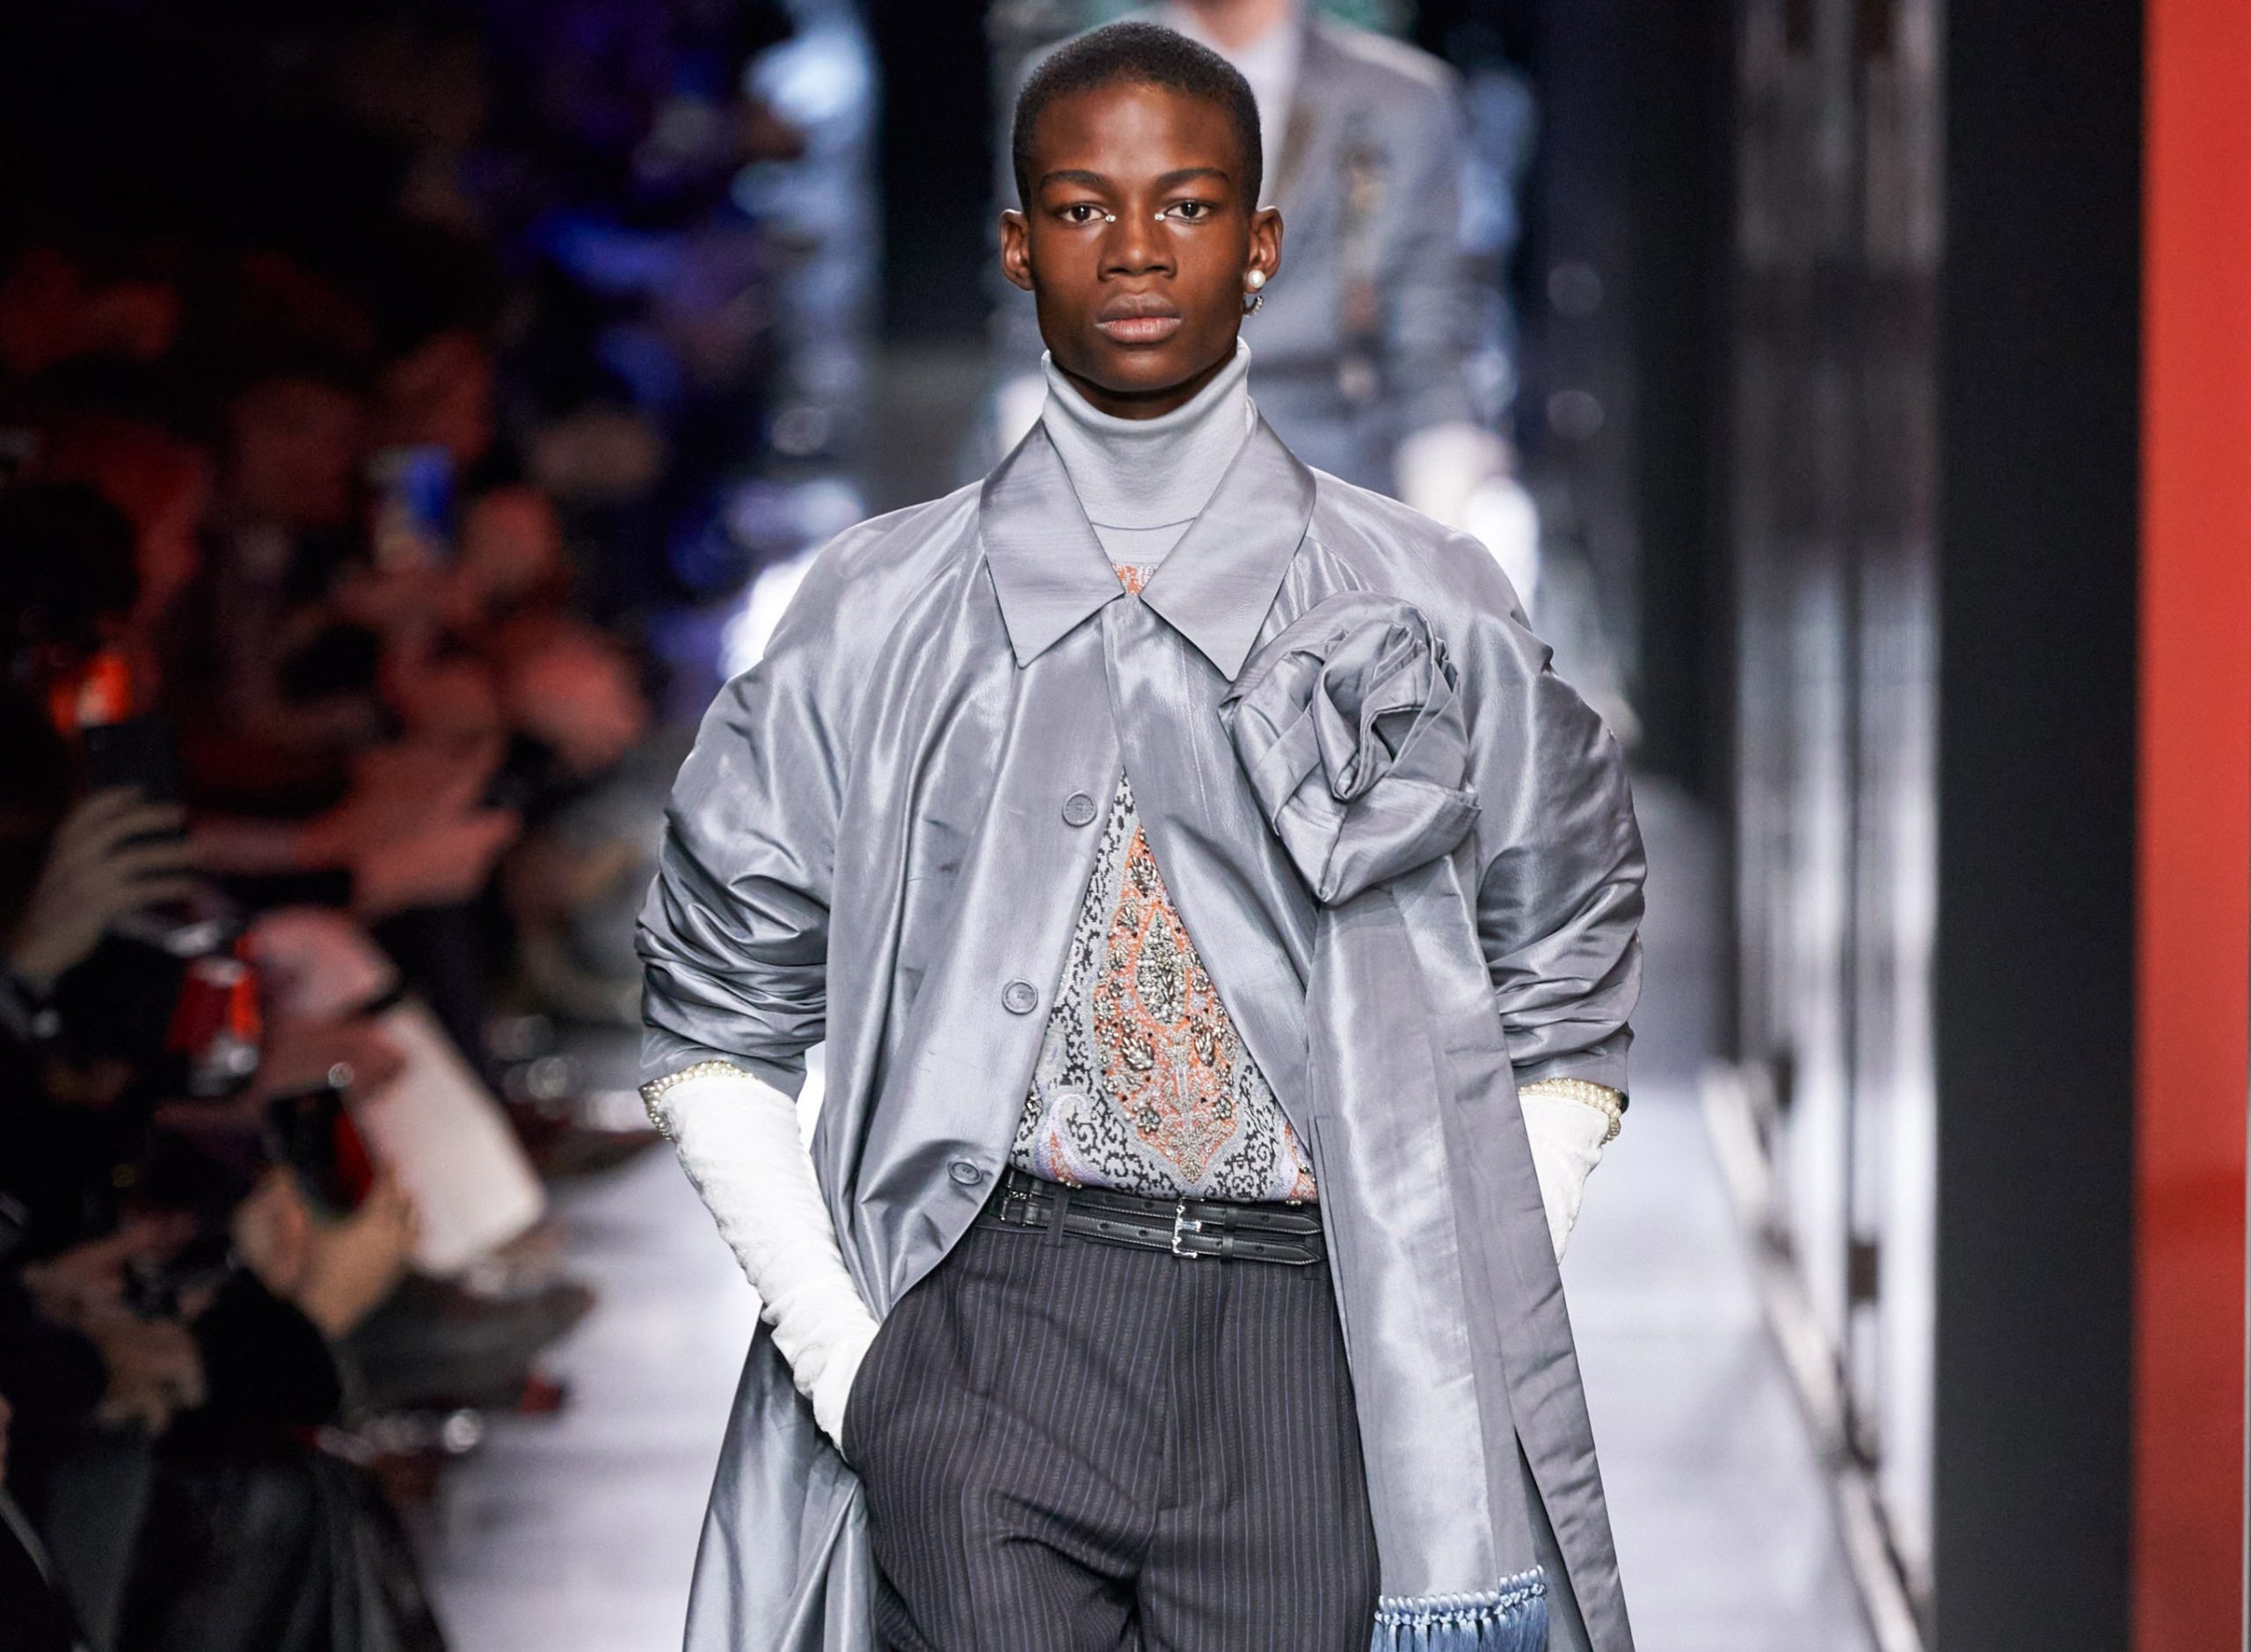 Watch Dior's FW 21/22 Menswear Show Live From Paris - GQ Middle East